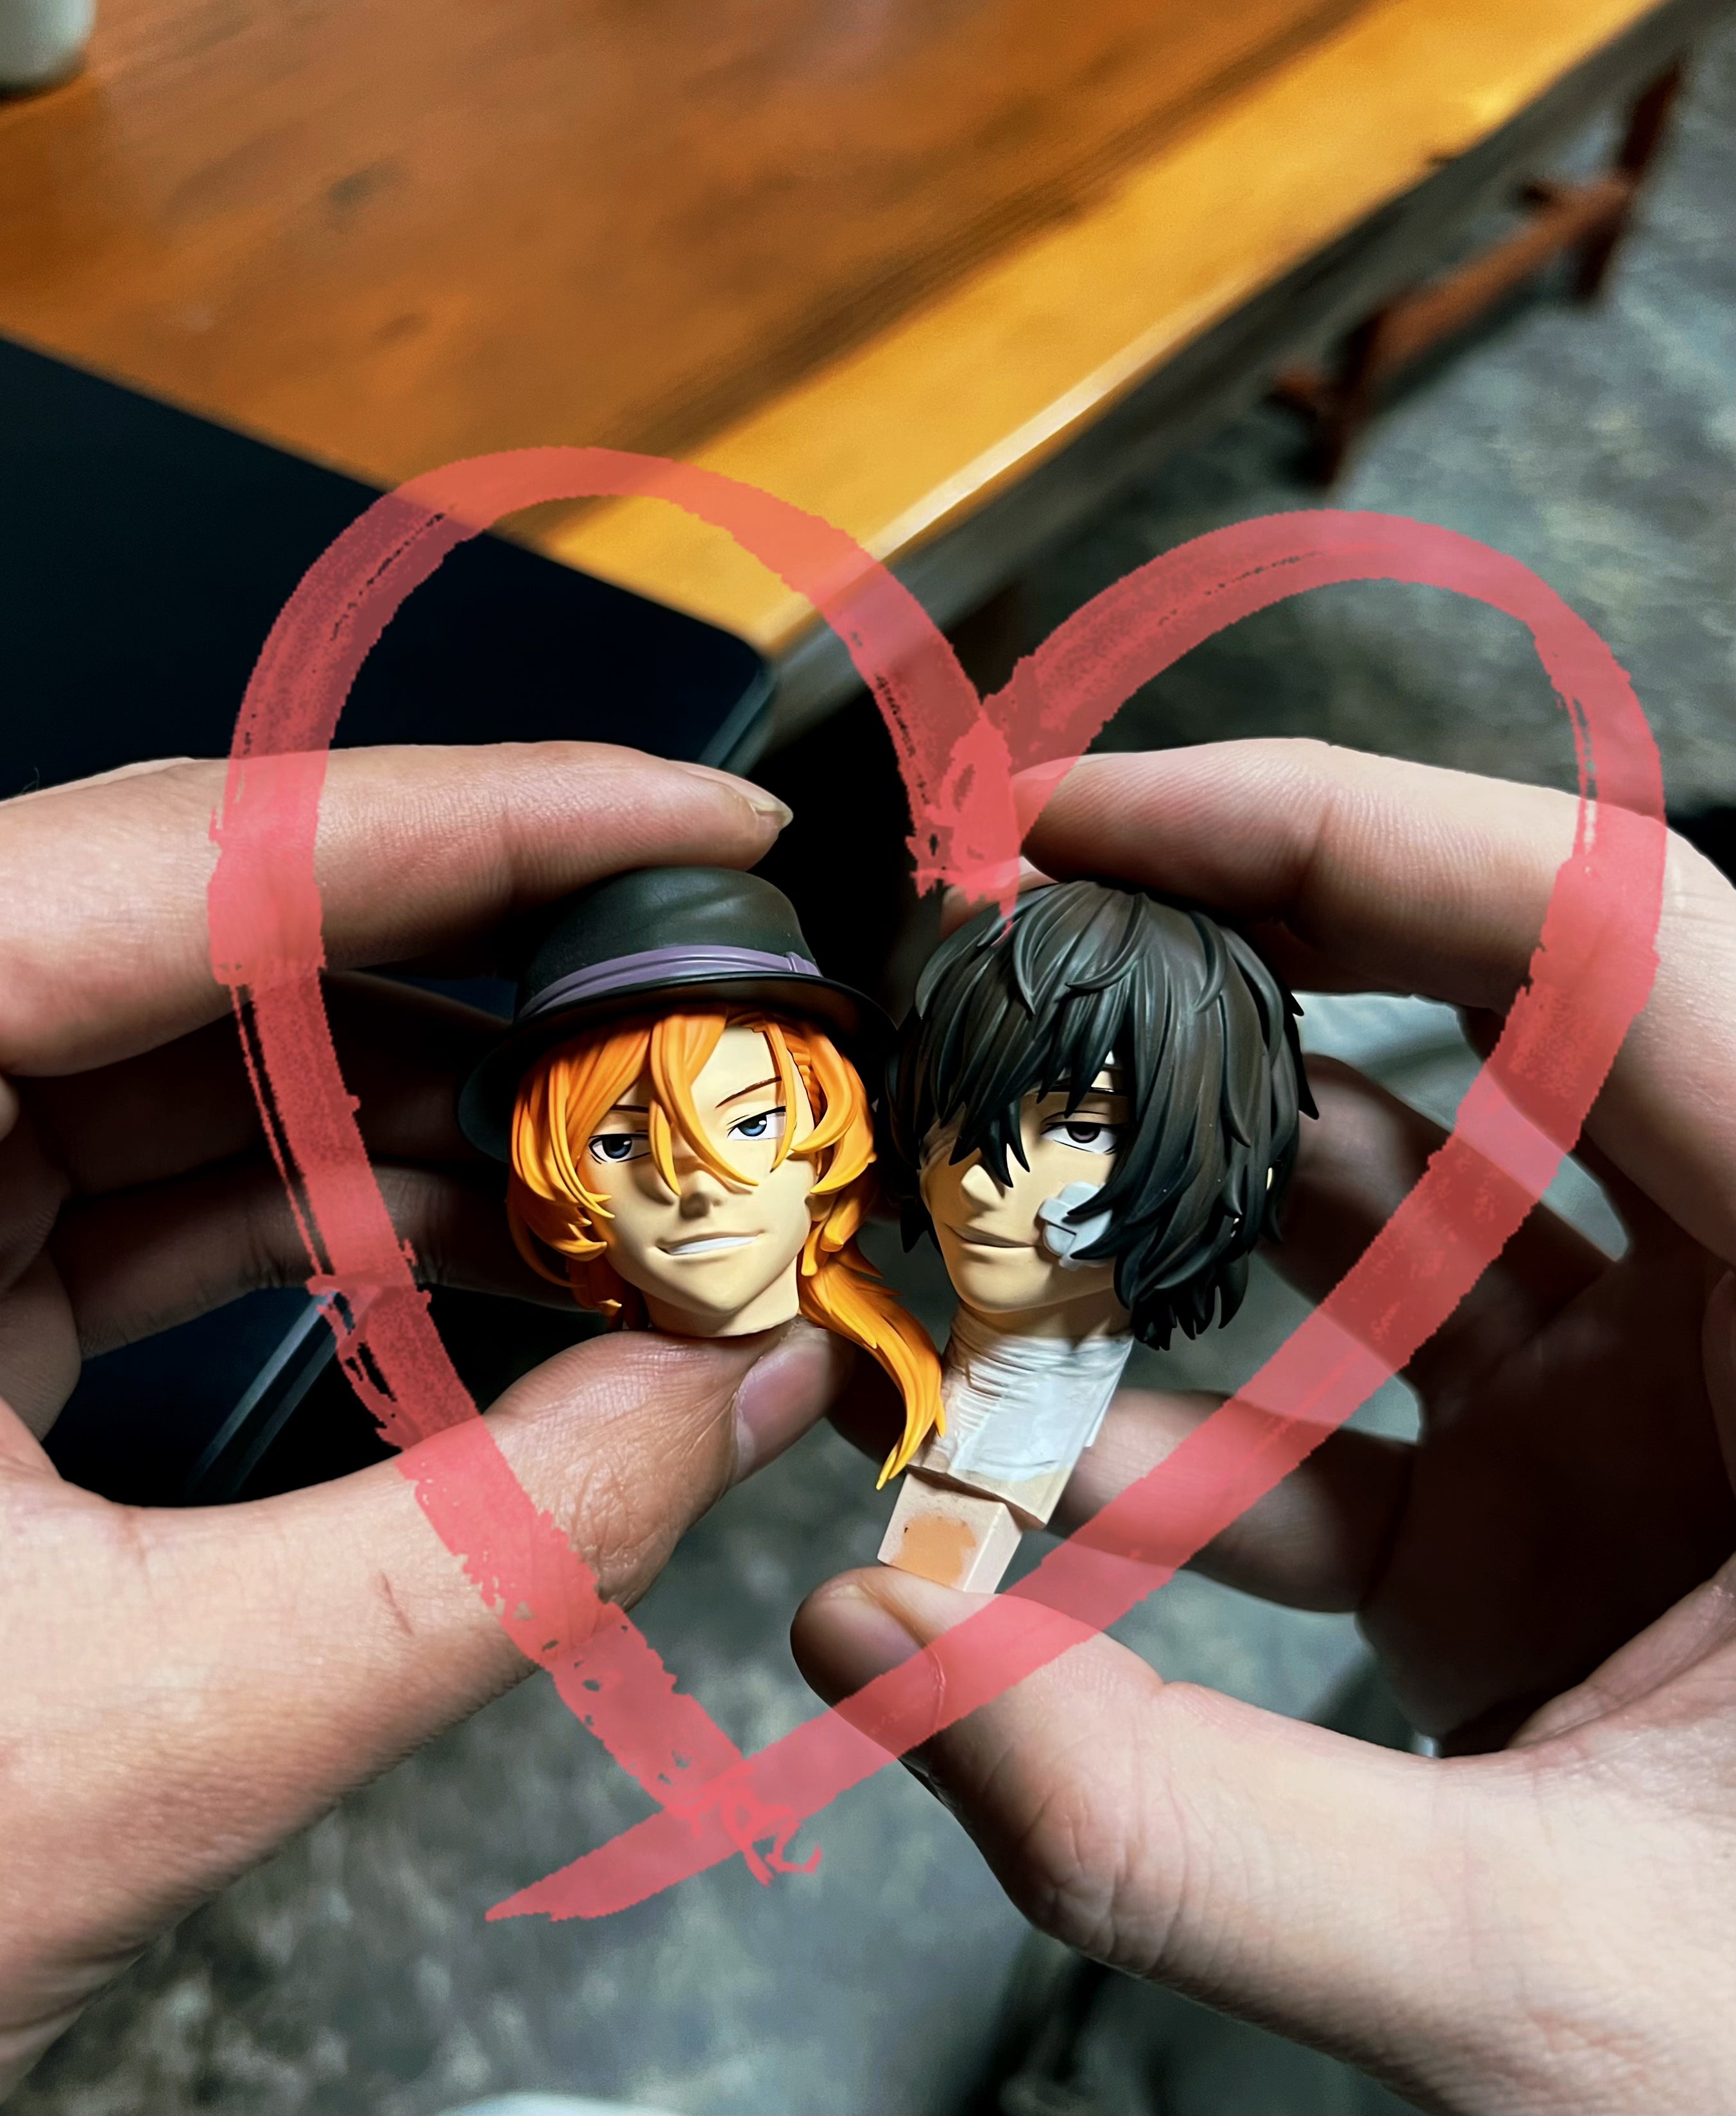 Buy Bungou Stray Dogs BSD Inspired Stickers / Chuuya / Dazai / Clothes Swap  / Anime Sticker Packs Online in India - Etsy